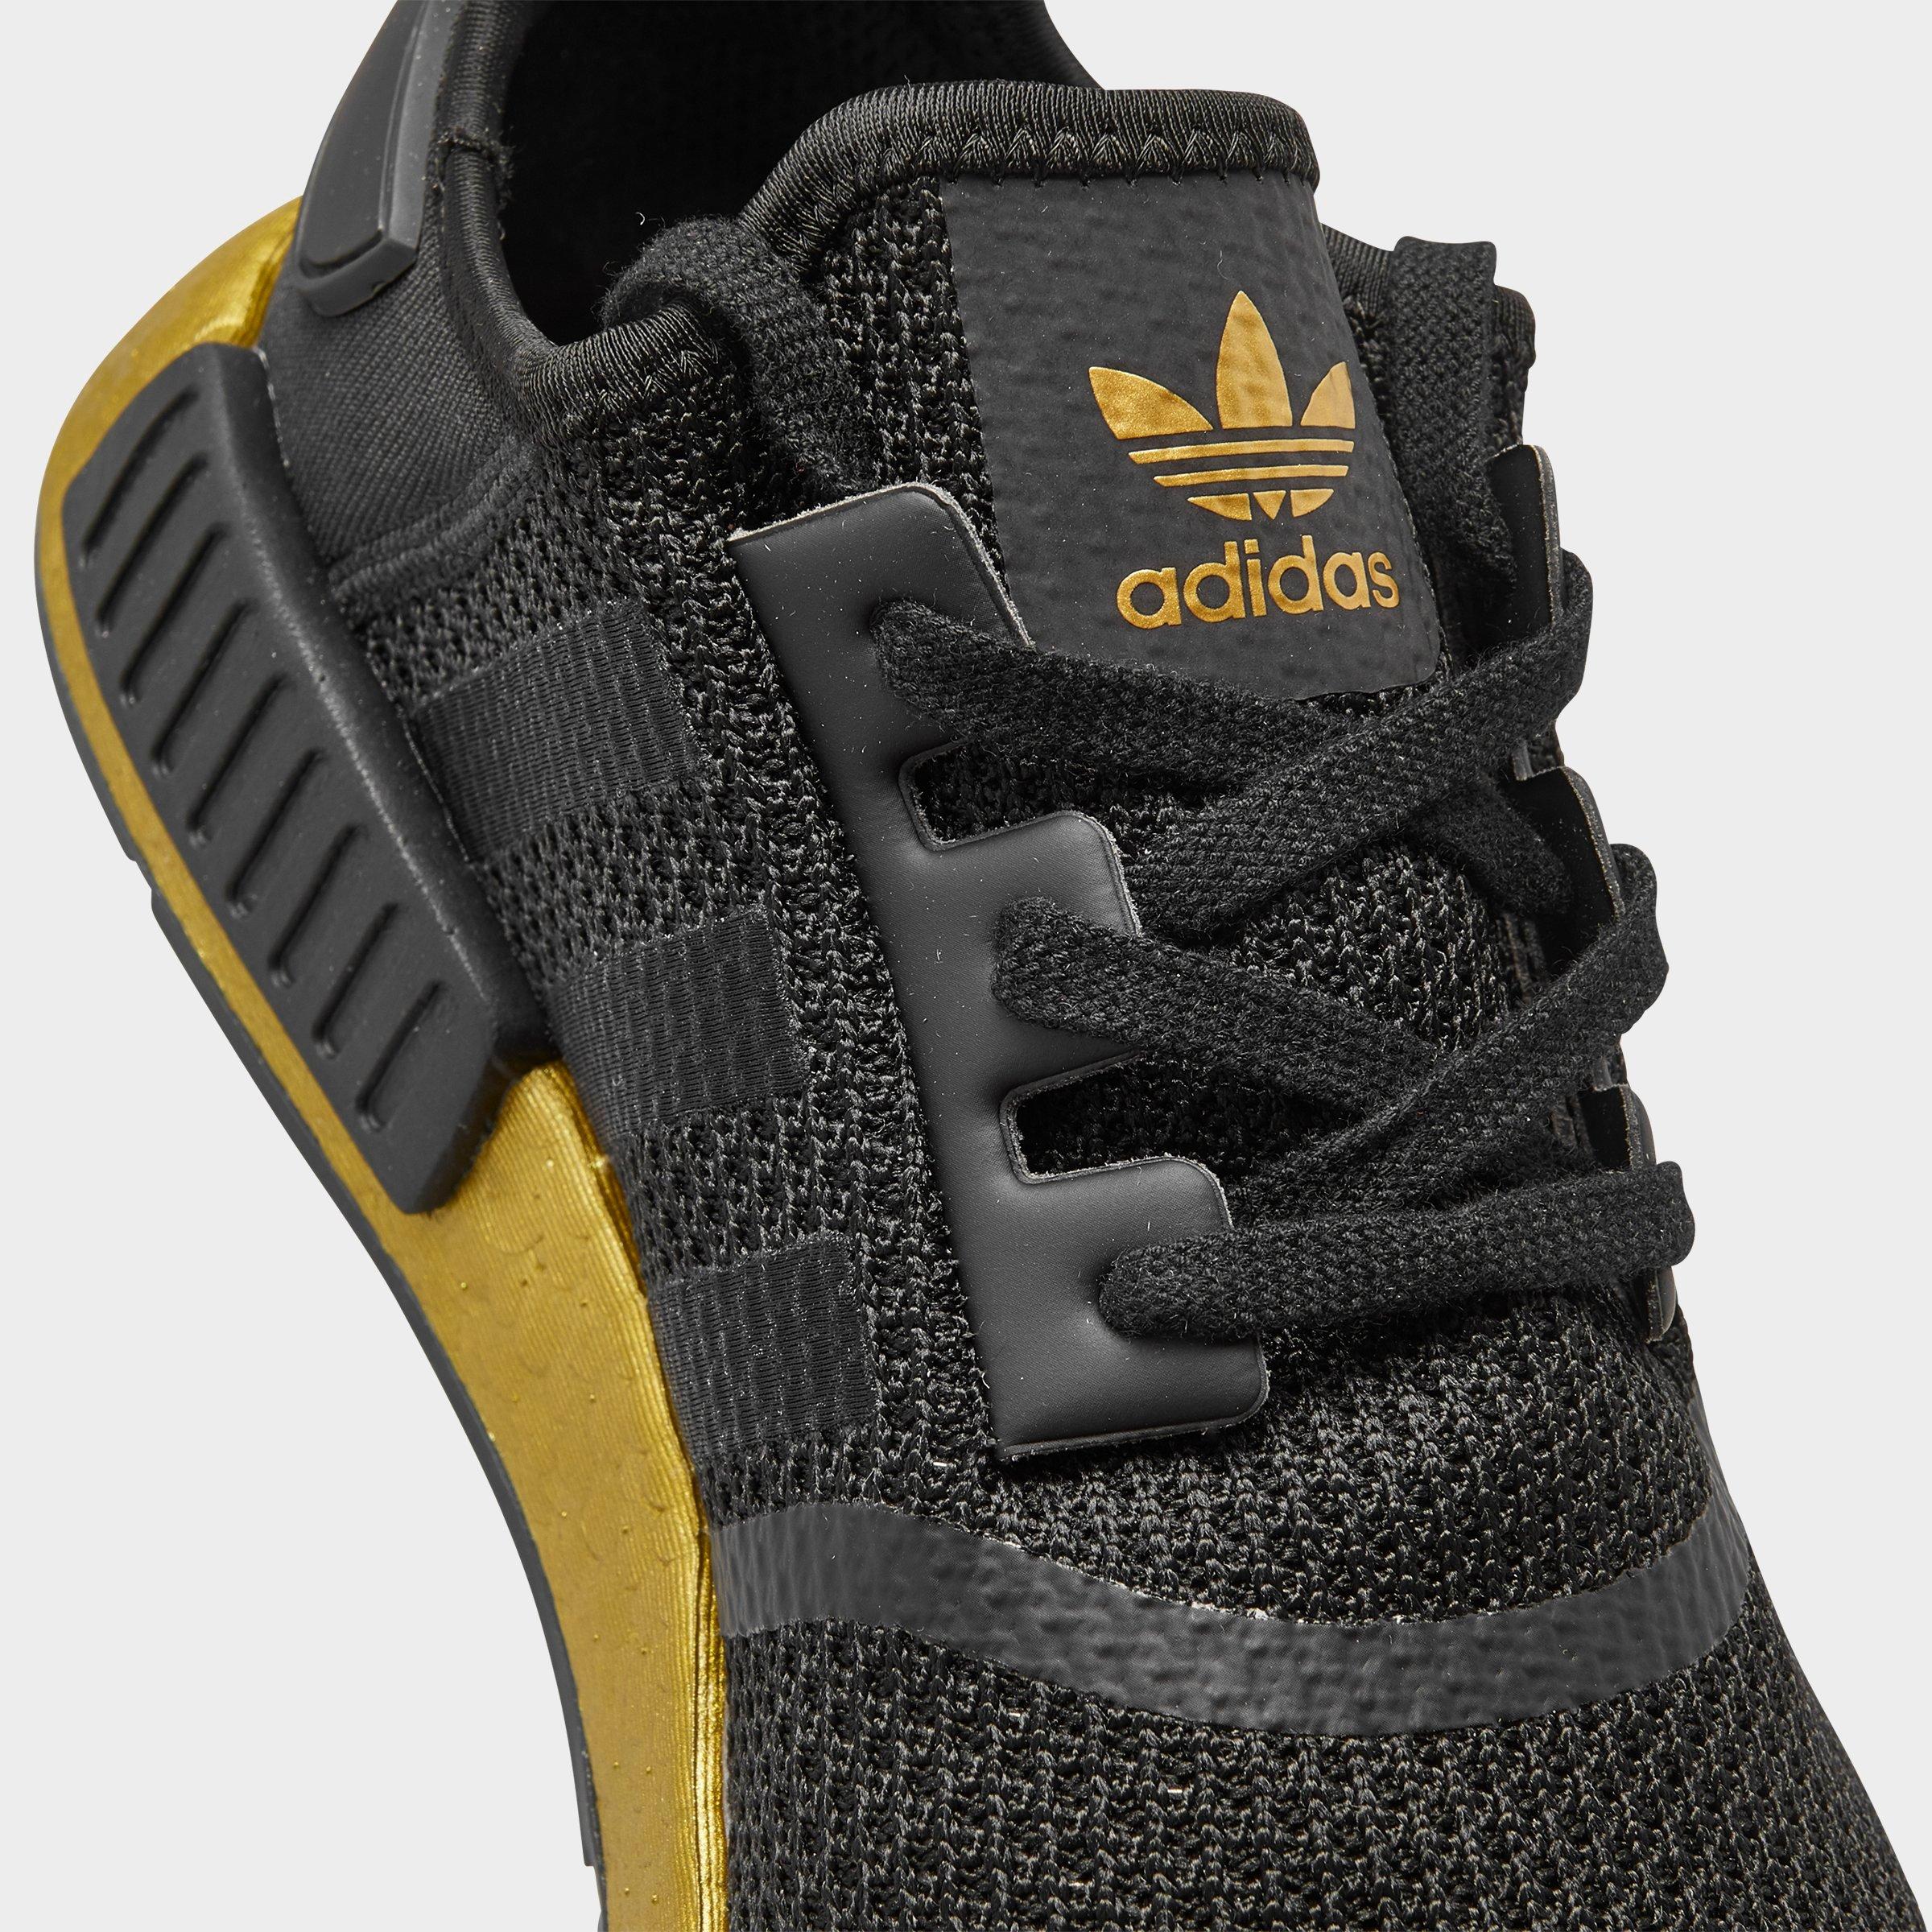 adidas nmd runner r1 casual shoes